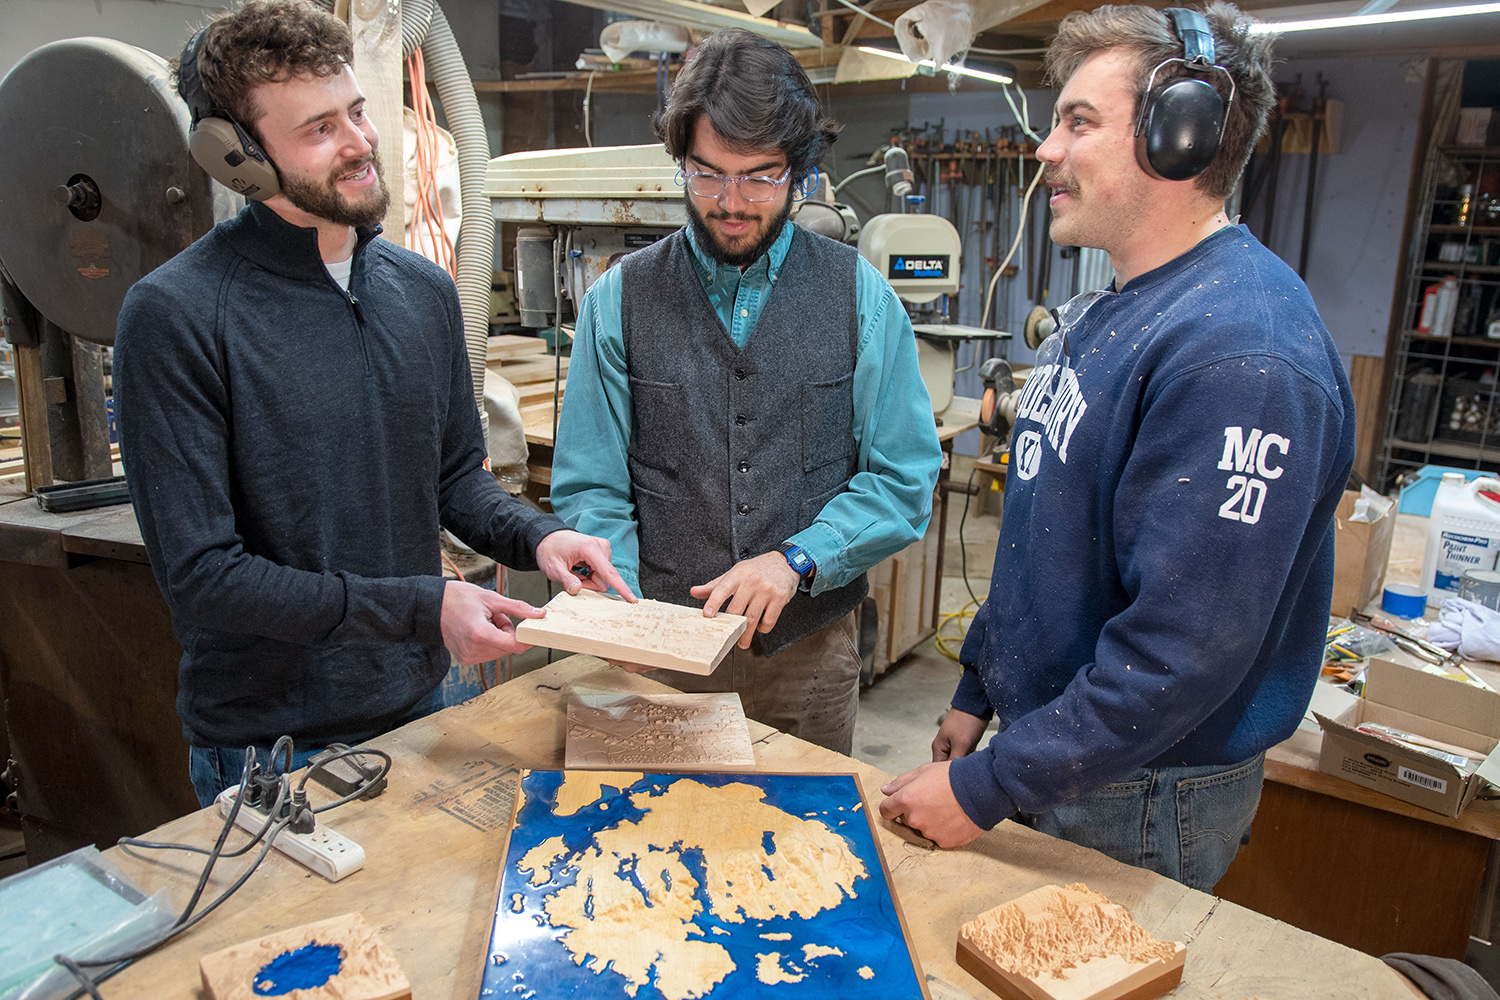 Co-founders Jacob Freedman, Alex Gemme and Nathaniel Klein graduated from Middlebury and launched Treeline Terrains in 2021. Photo by Erica Houskeeper.